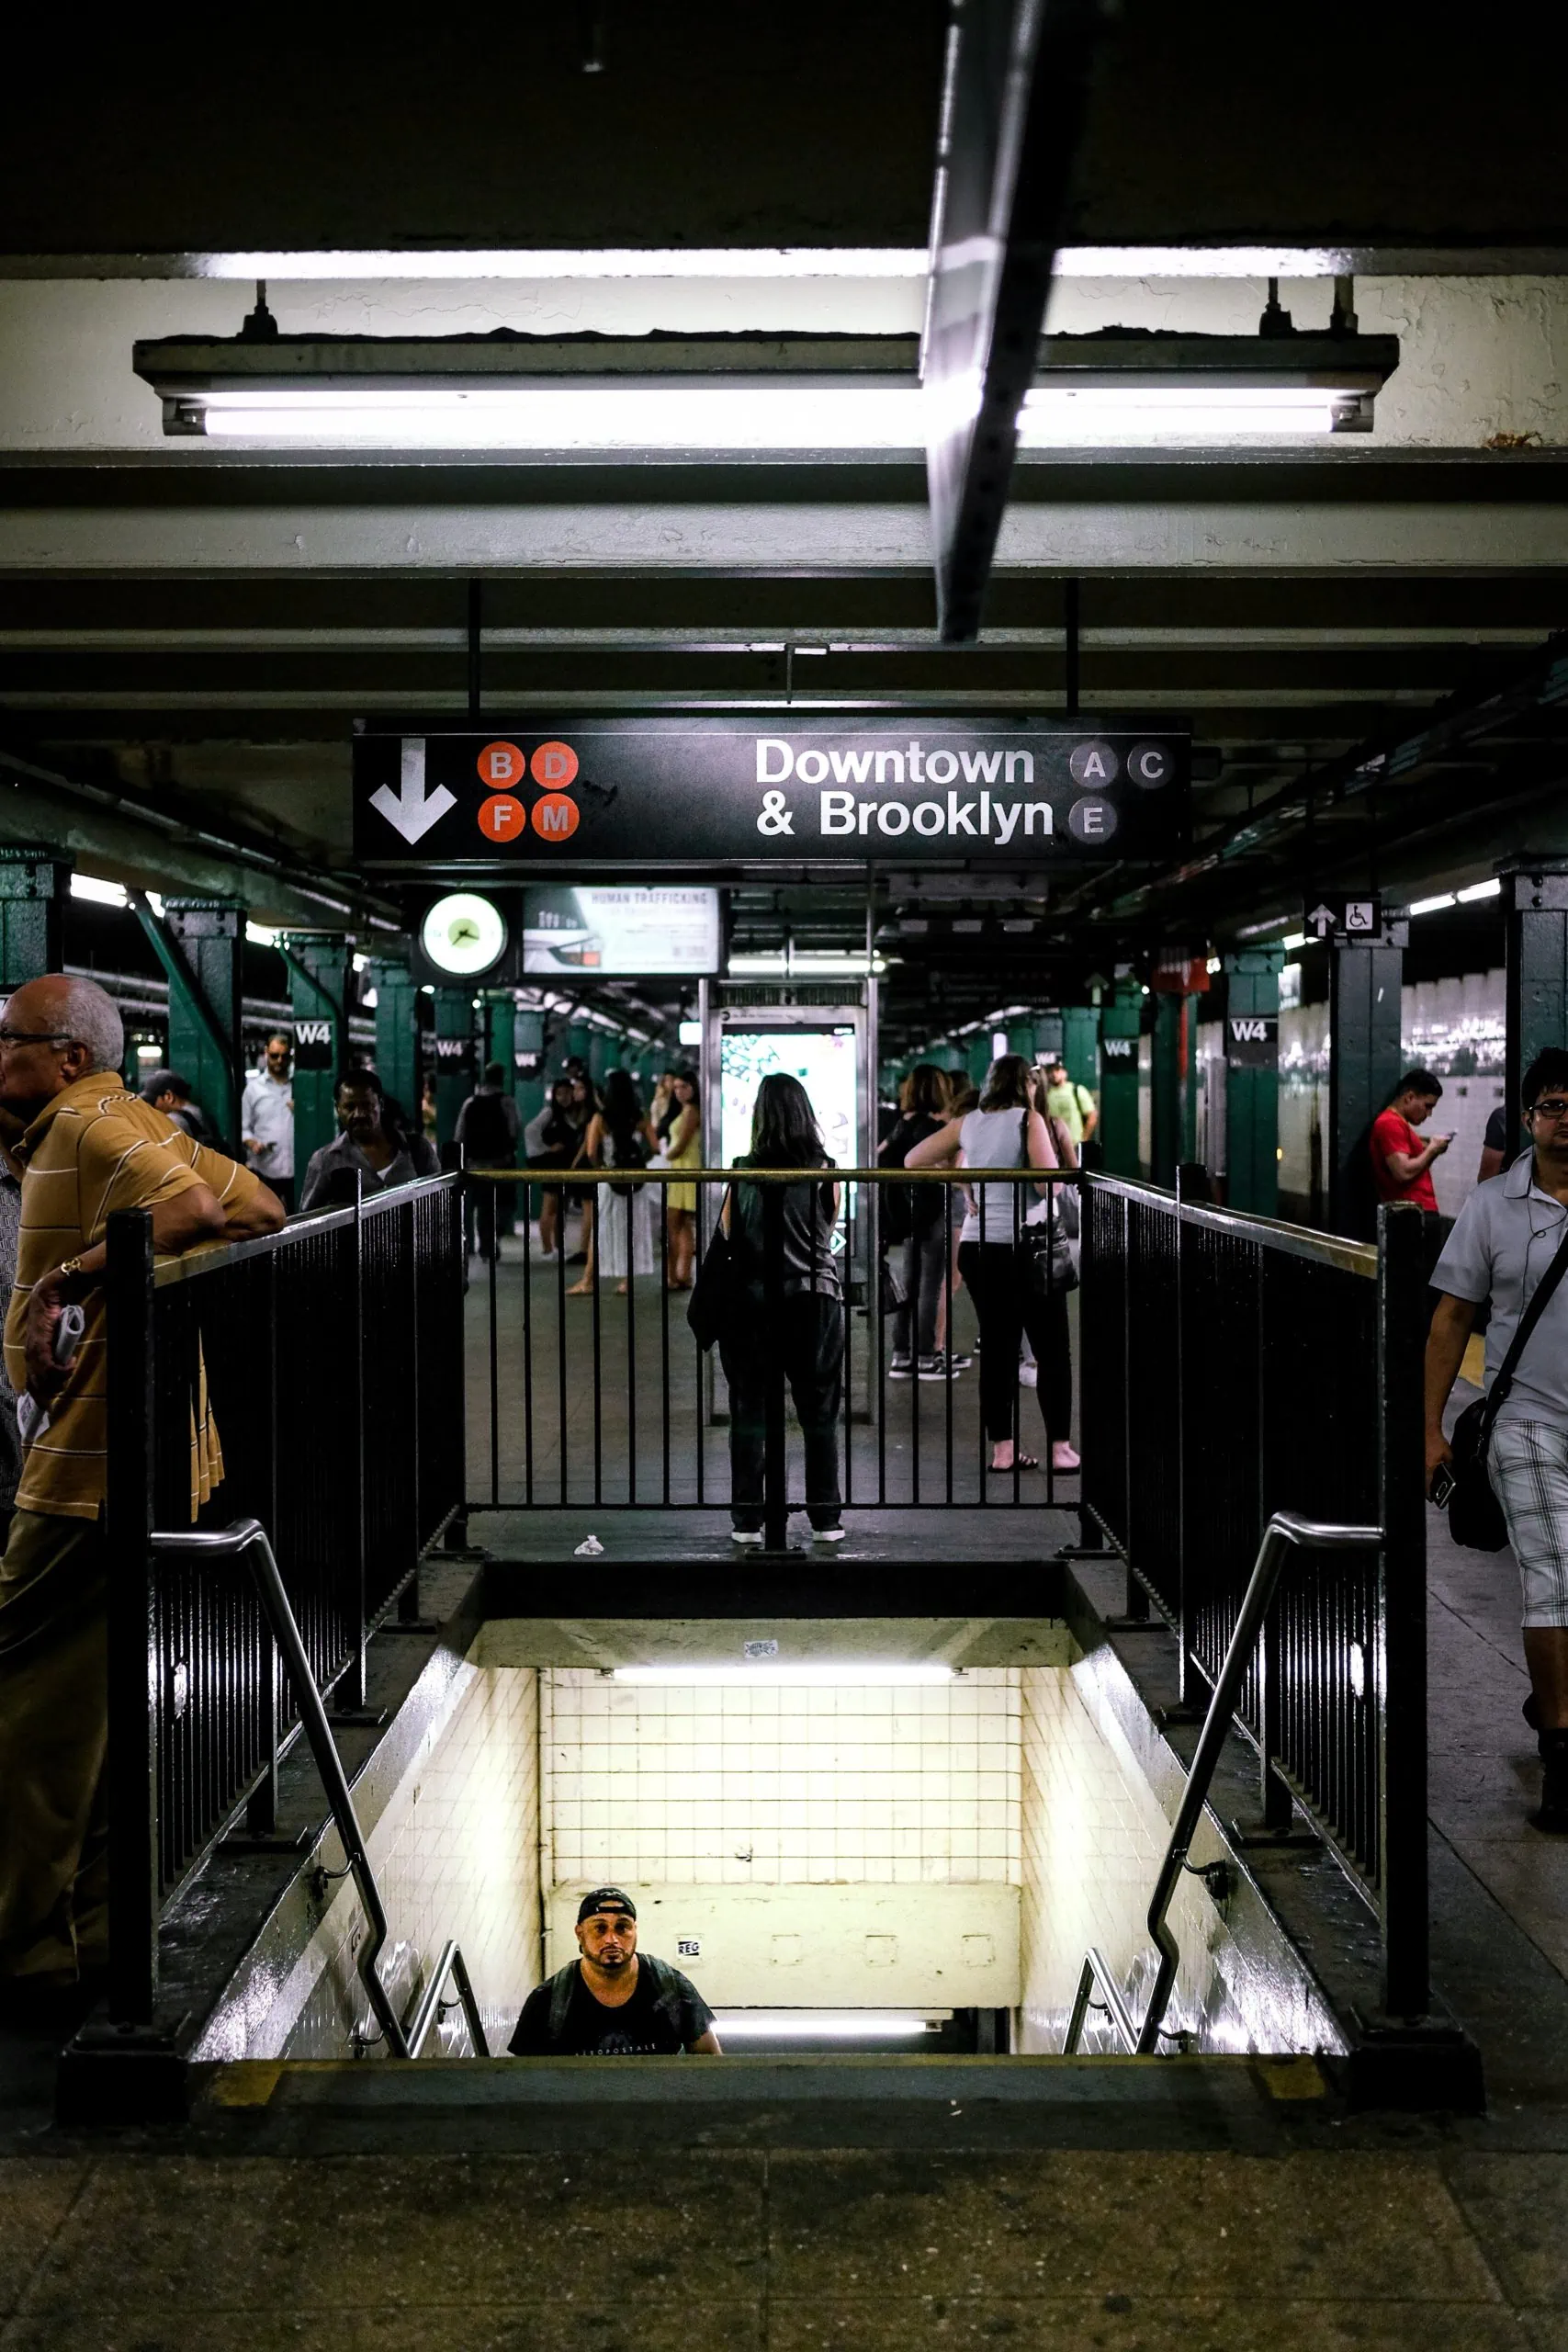 Subway in Brooklyn safer with security cameras